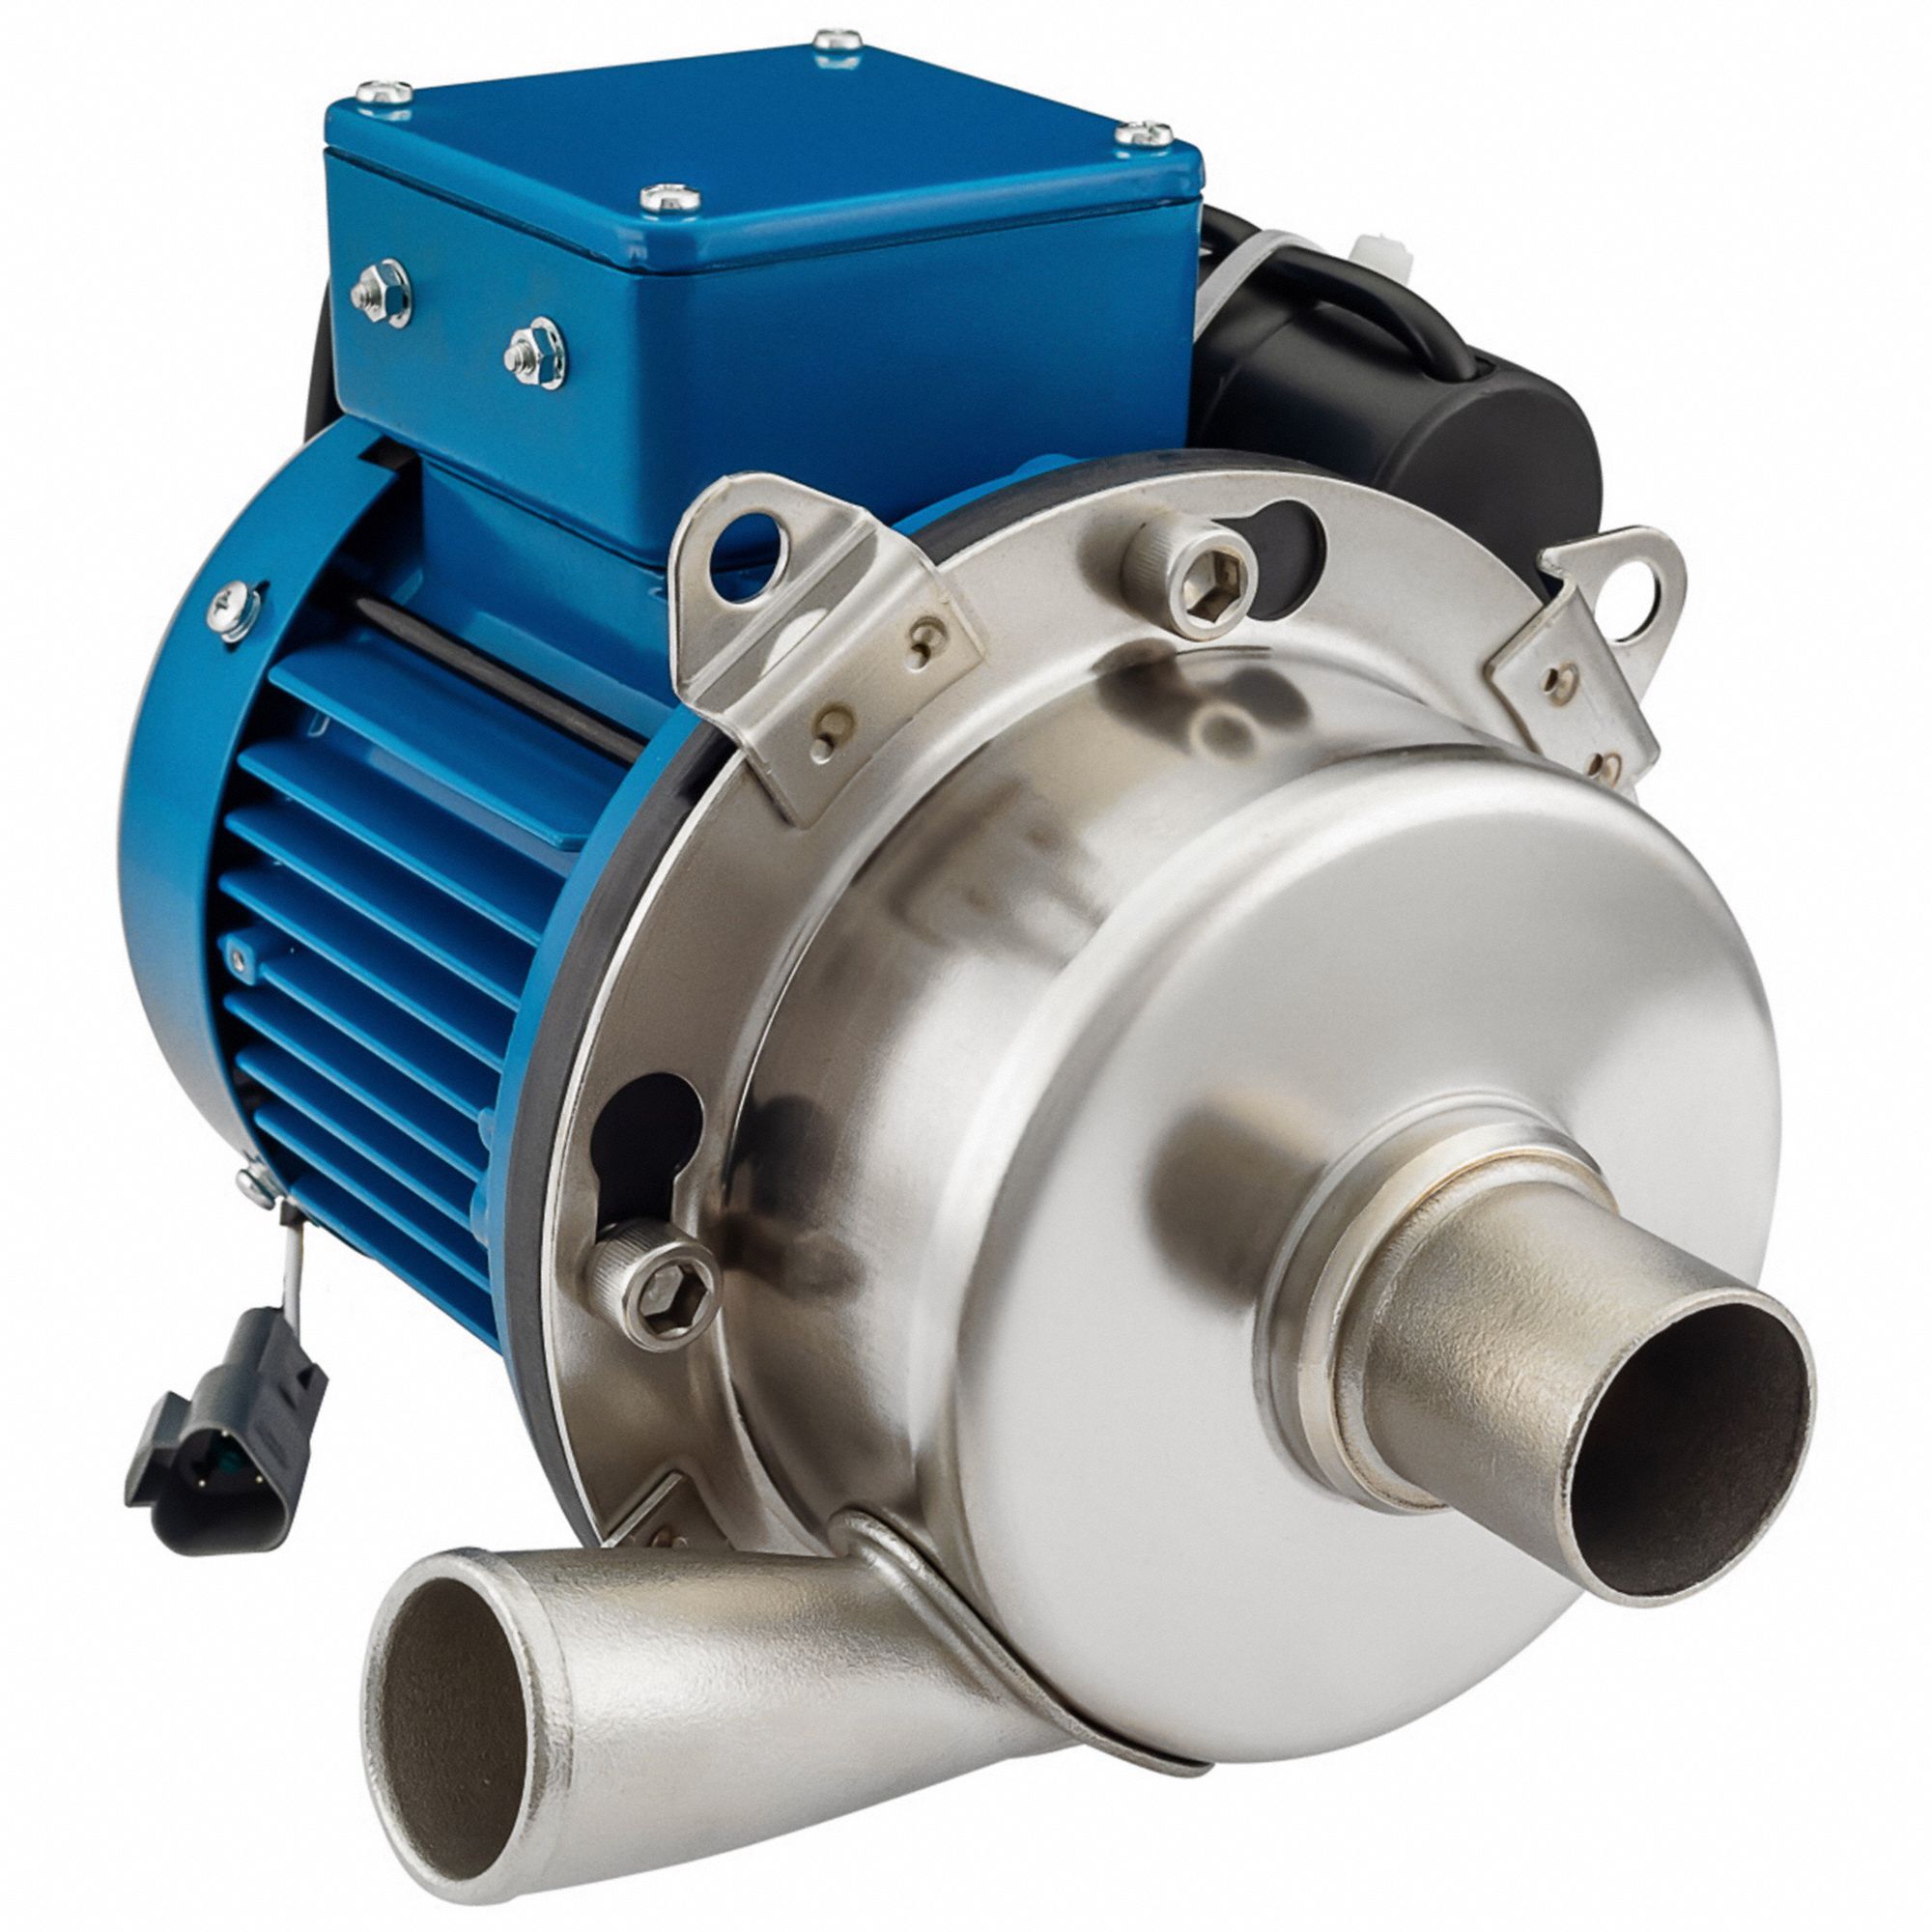 Centrifugal Pump: 1 hp, 115/230V AC, 64 ft Max Head, 1 1/2 in , 1 1/2 in Intake and Disch, TEFC